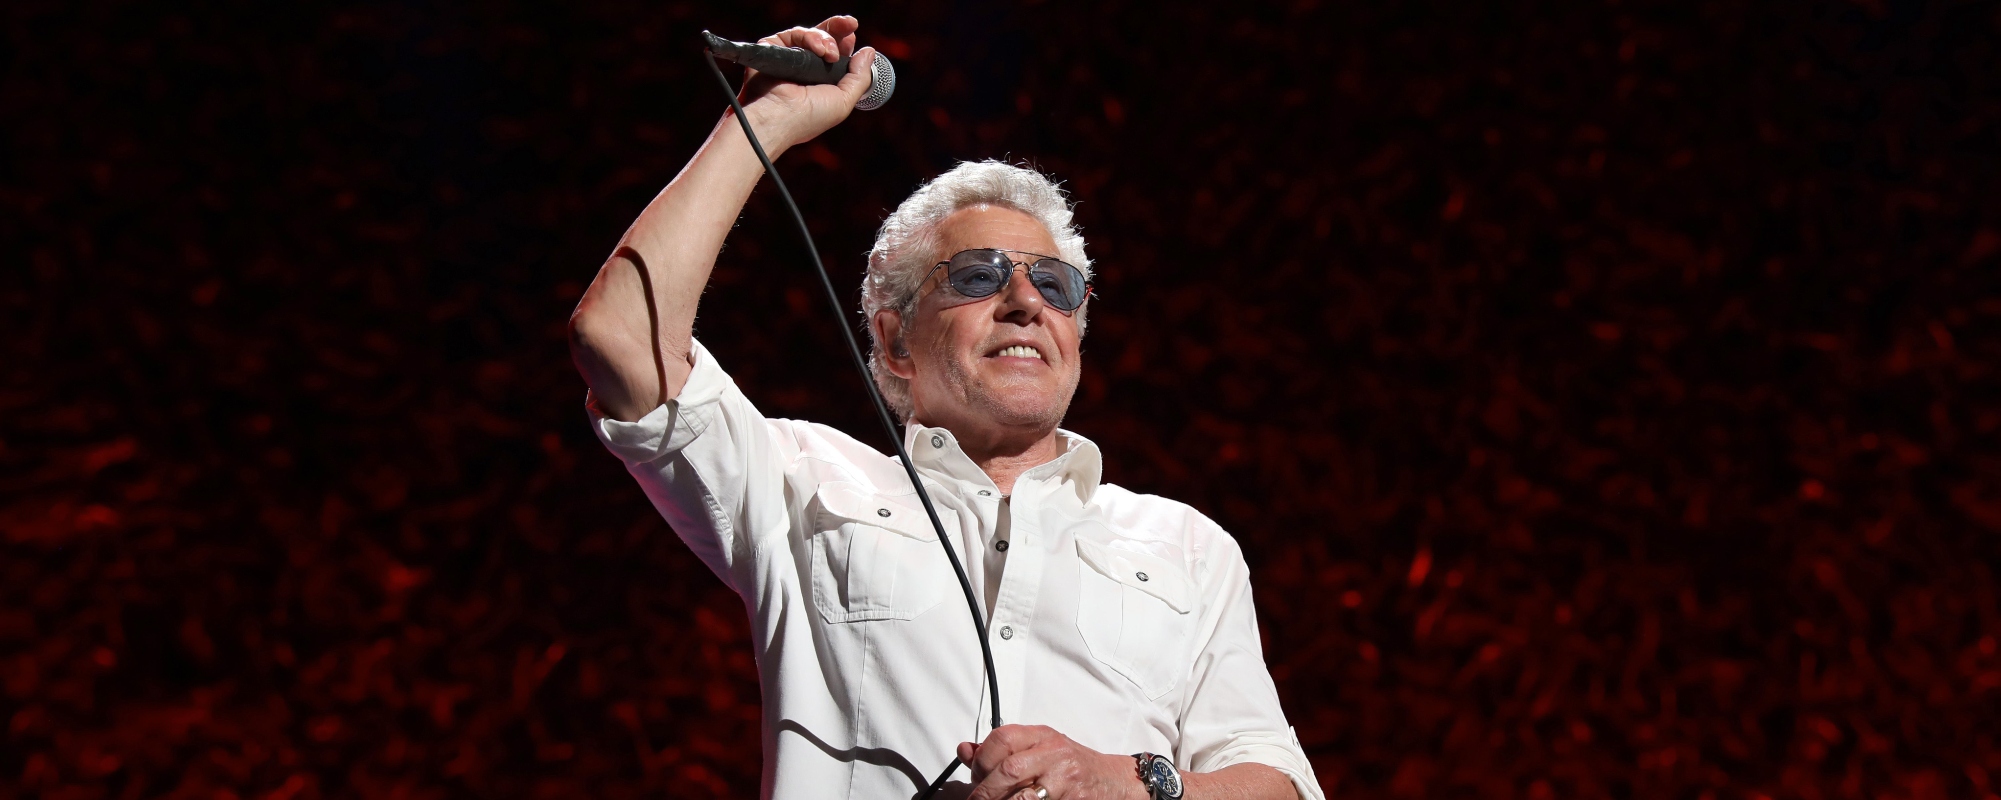 Roger Daltrey Casts Doubt on His Future With The Who